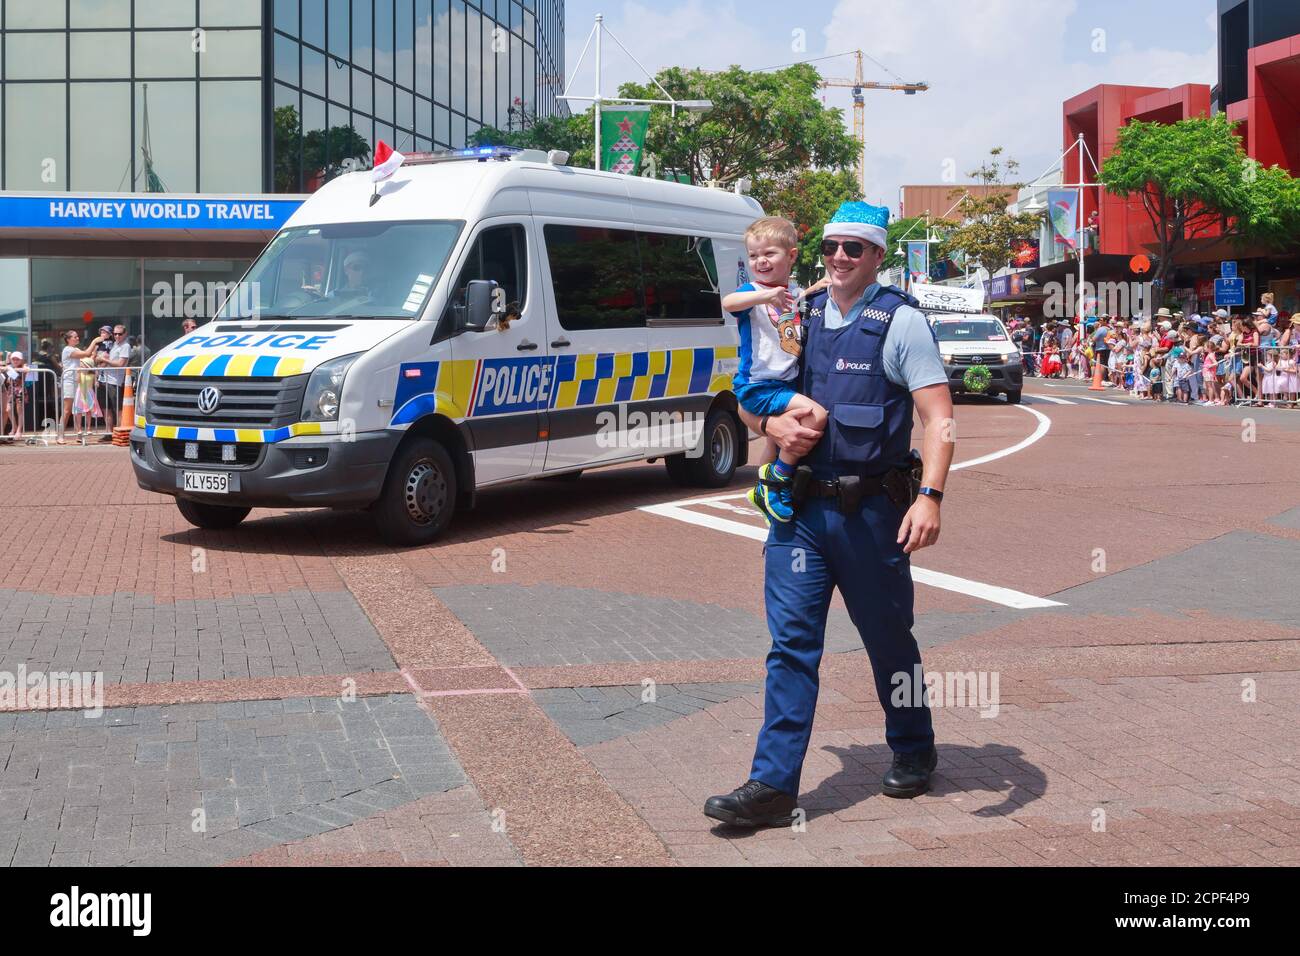 A New Zealand police officer carrying a child at a Christmas parade. Driving beside him is a police van. Tauranga, New Zealand, November 30 2019 Stock Photo